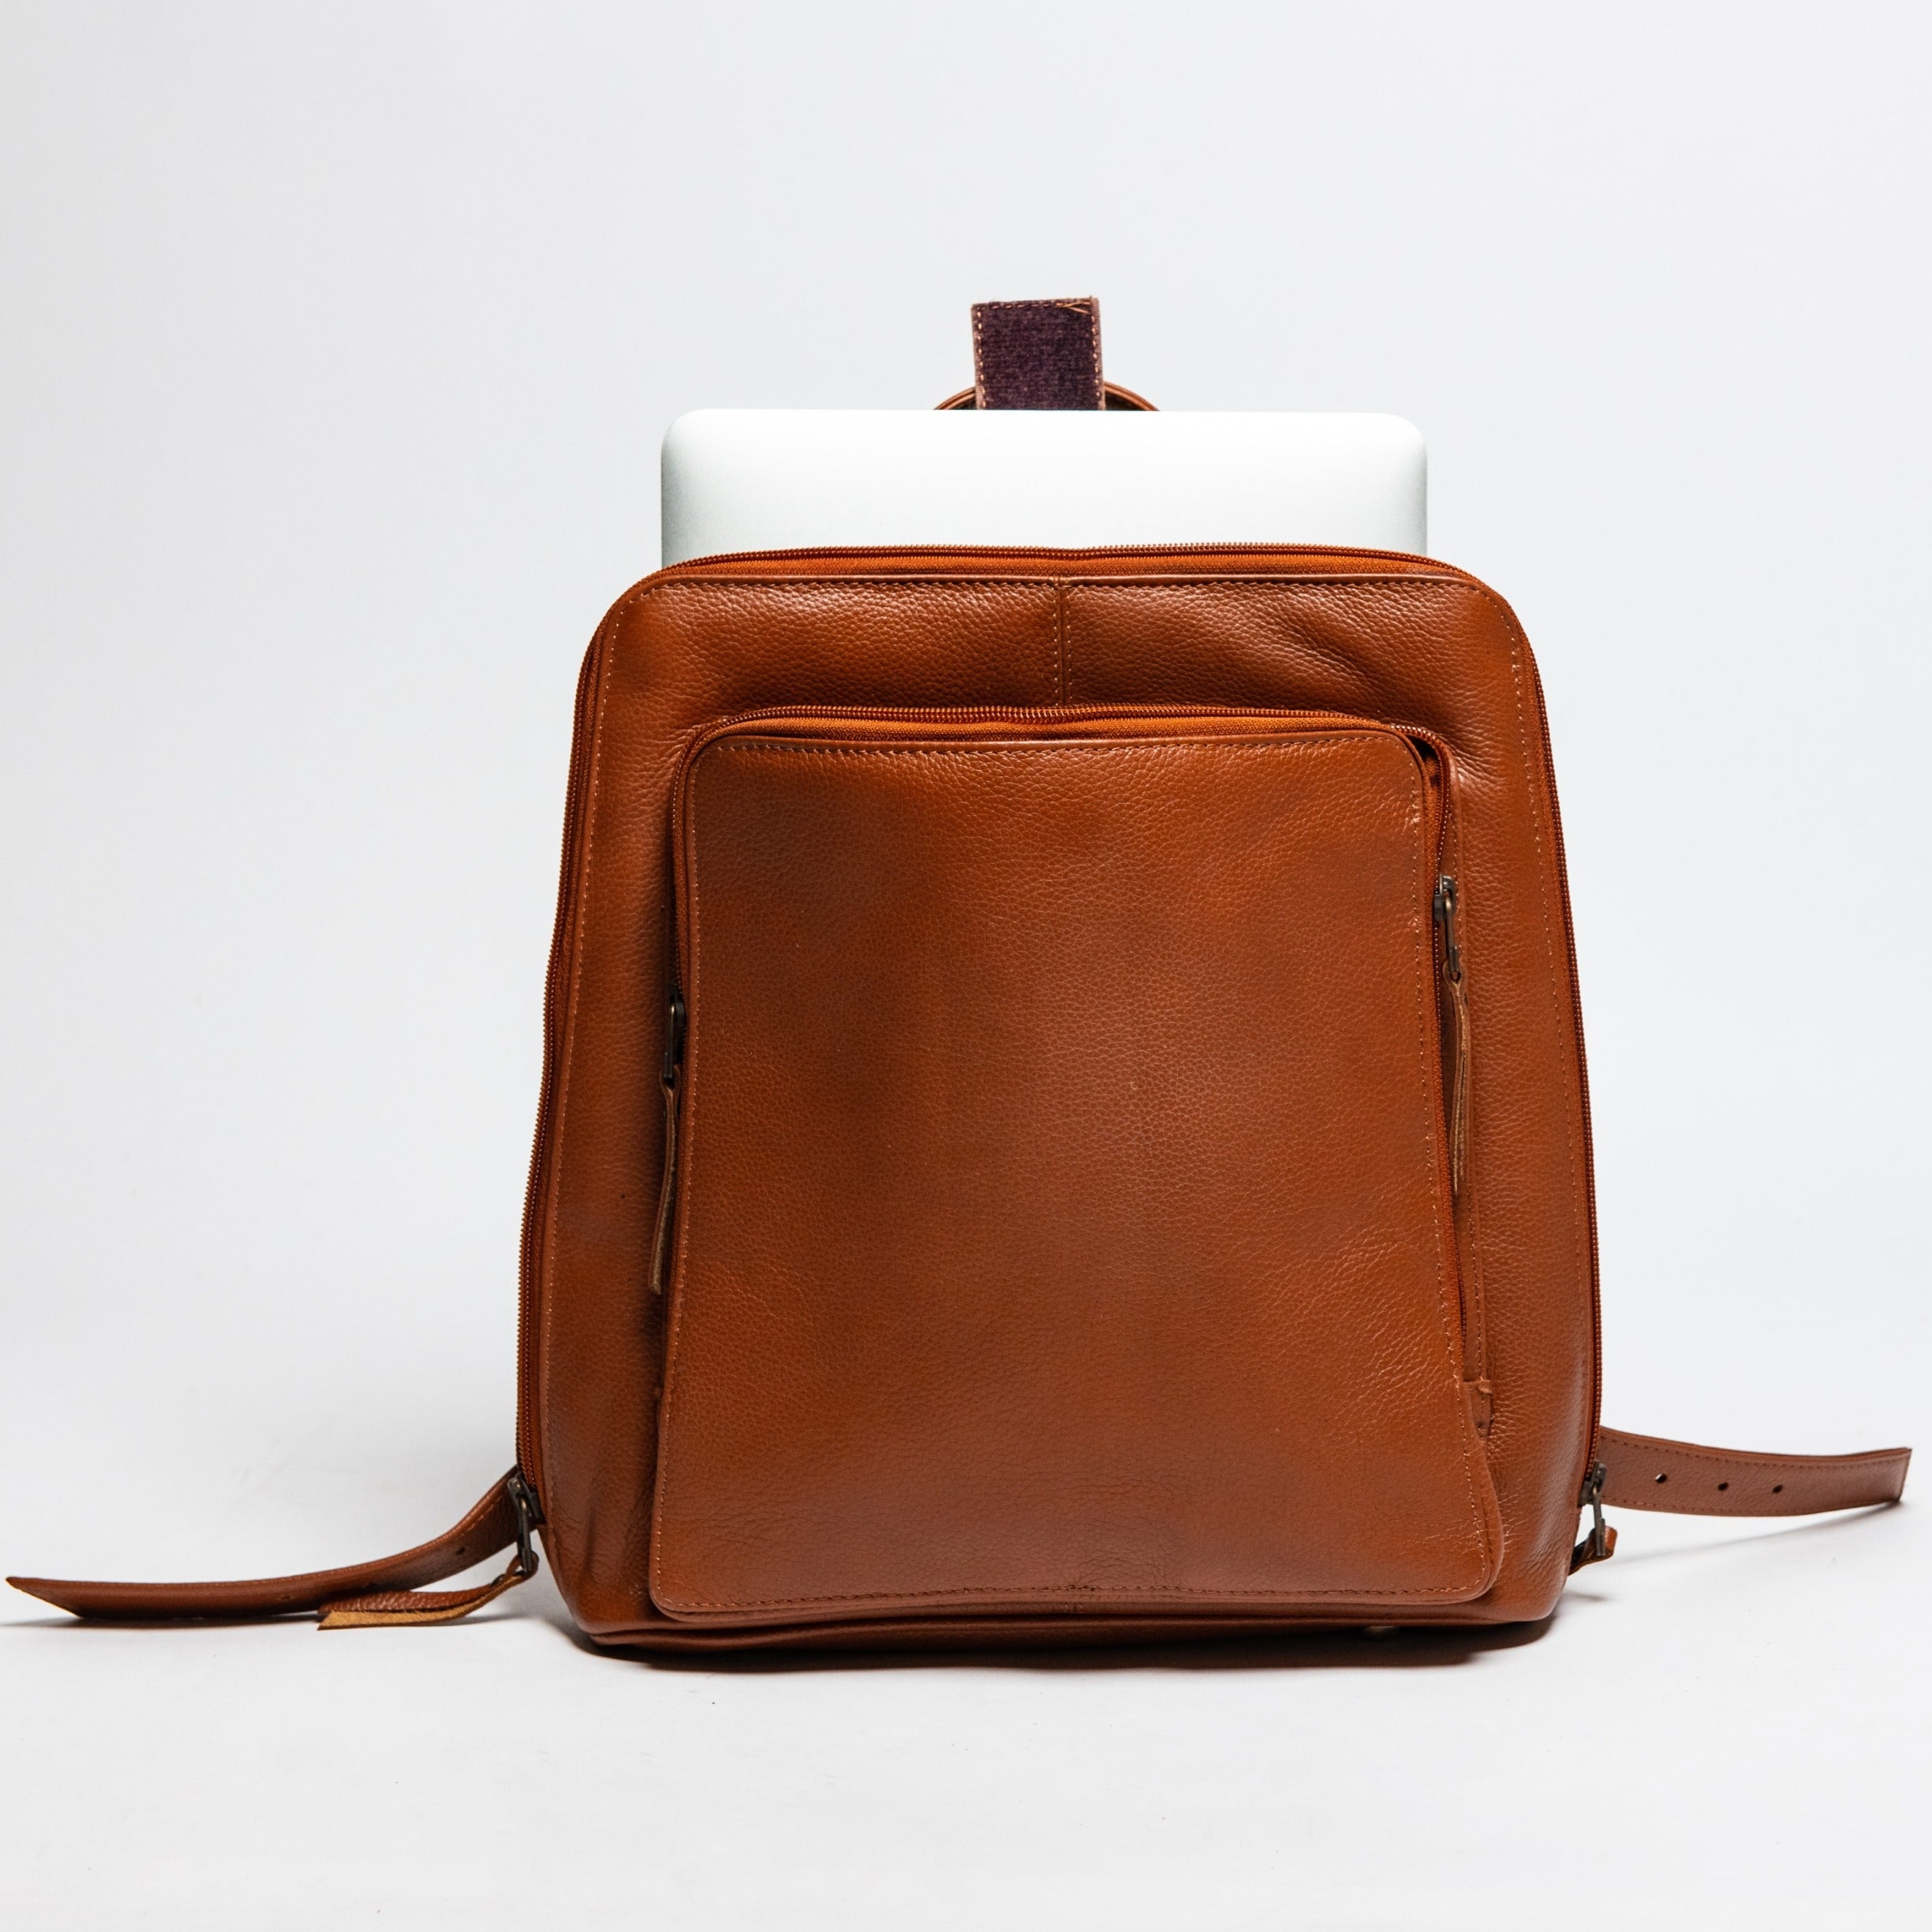 Tech Leather Backpack - Tan